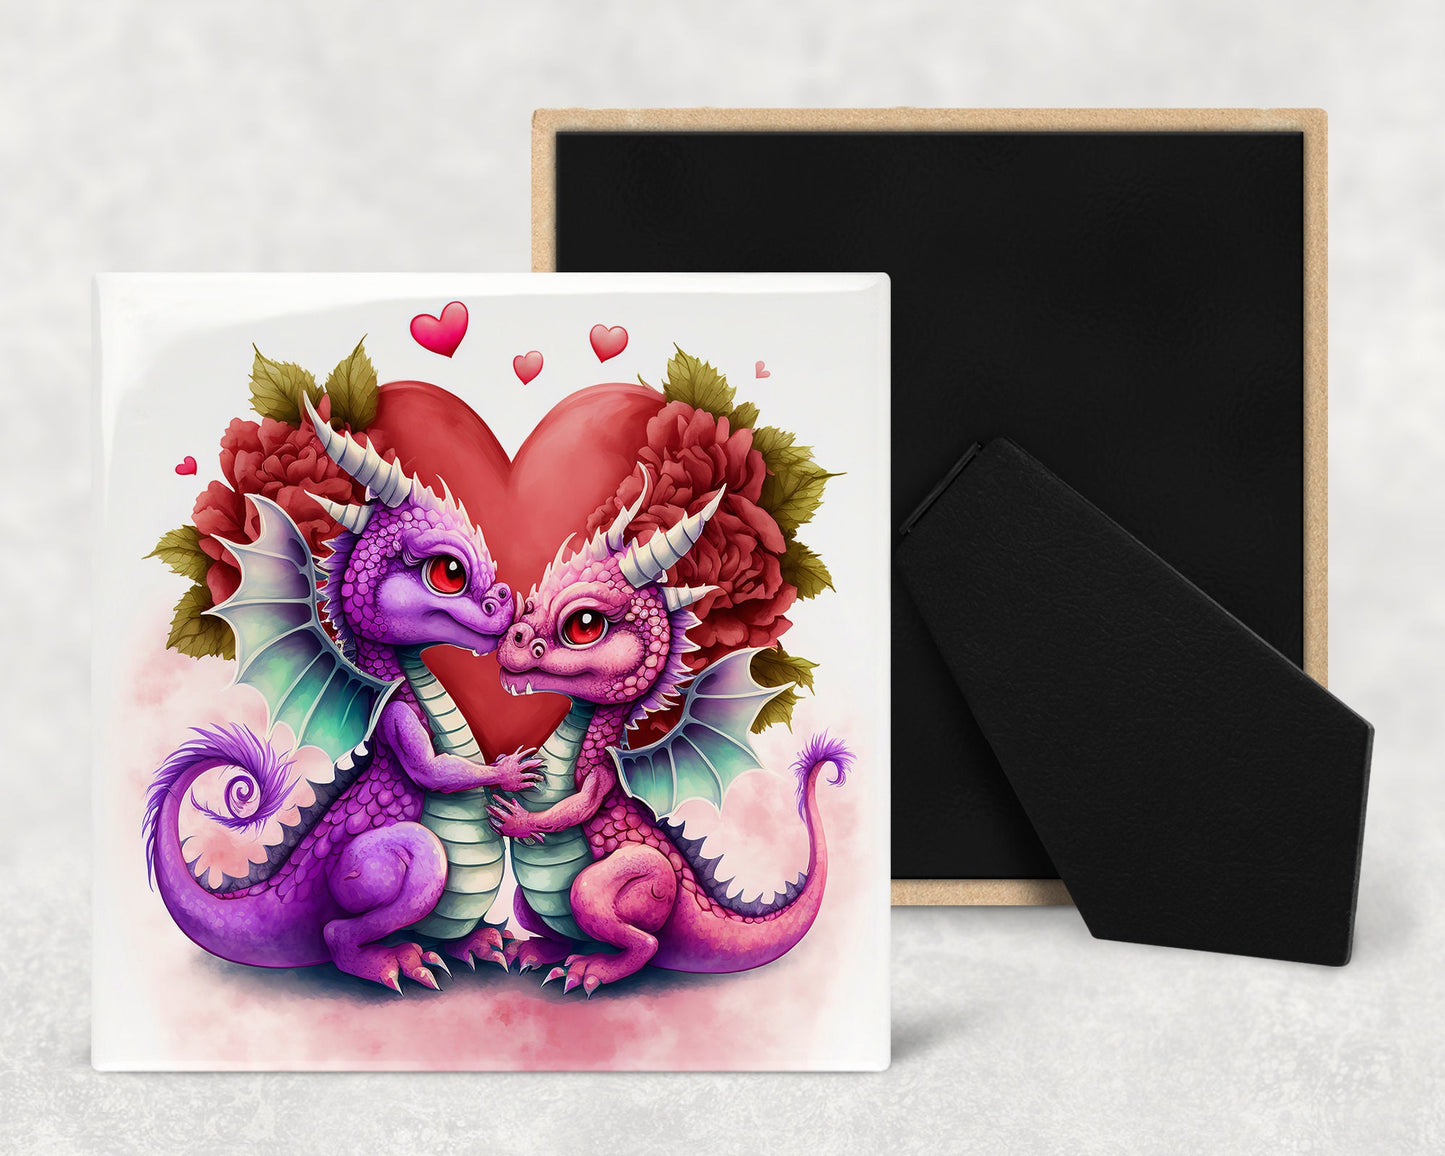 Cute Cartoon Dragons In Love Decorative Ceramic Tile Set with Optional Easel Back - Available in 4 sizes - Set of 4